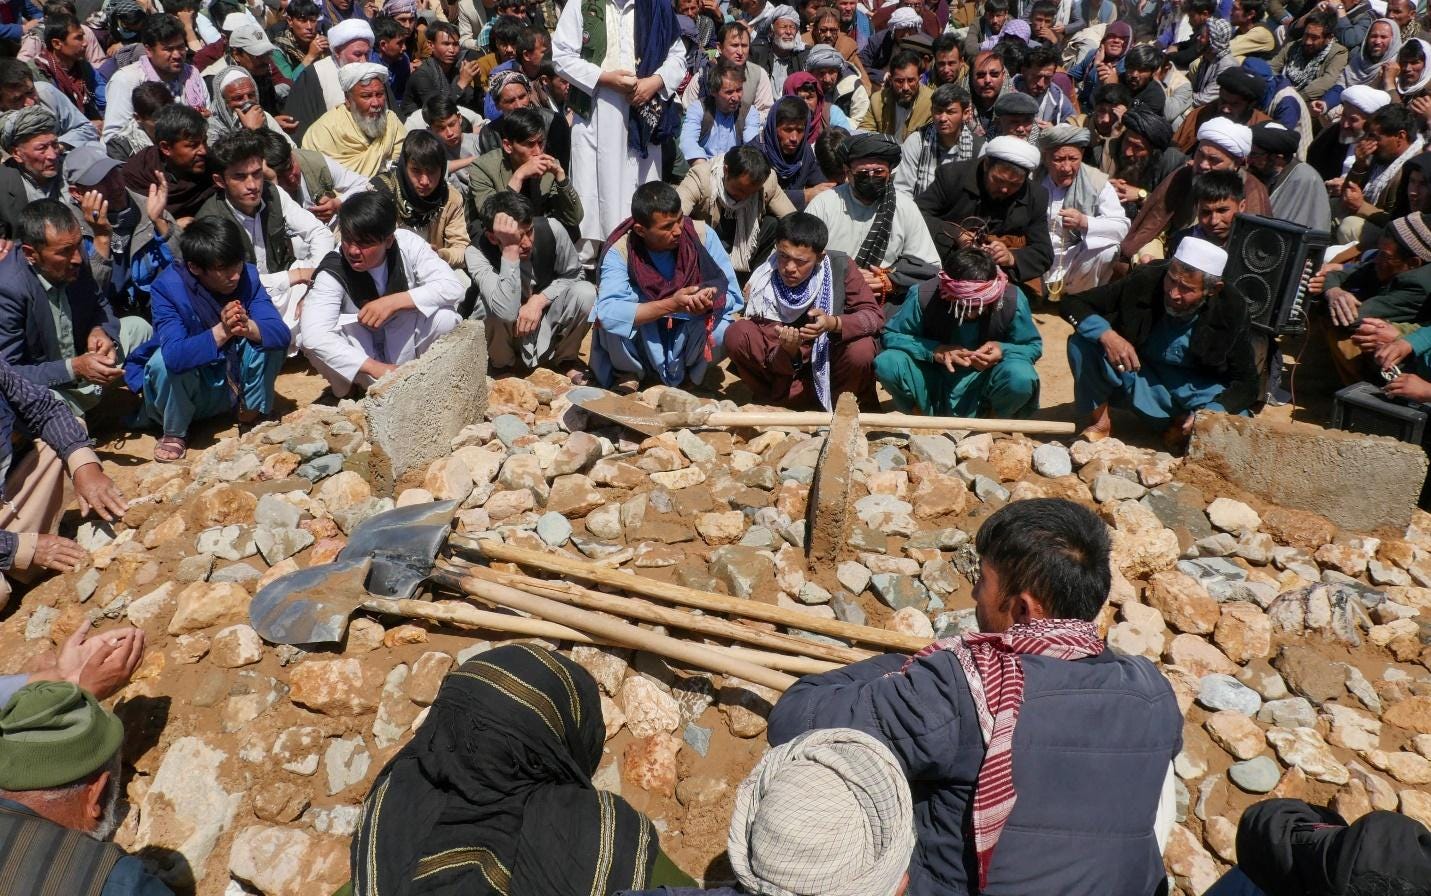 A crowd surrounds a burial site